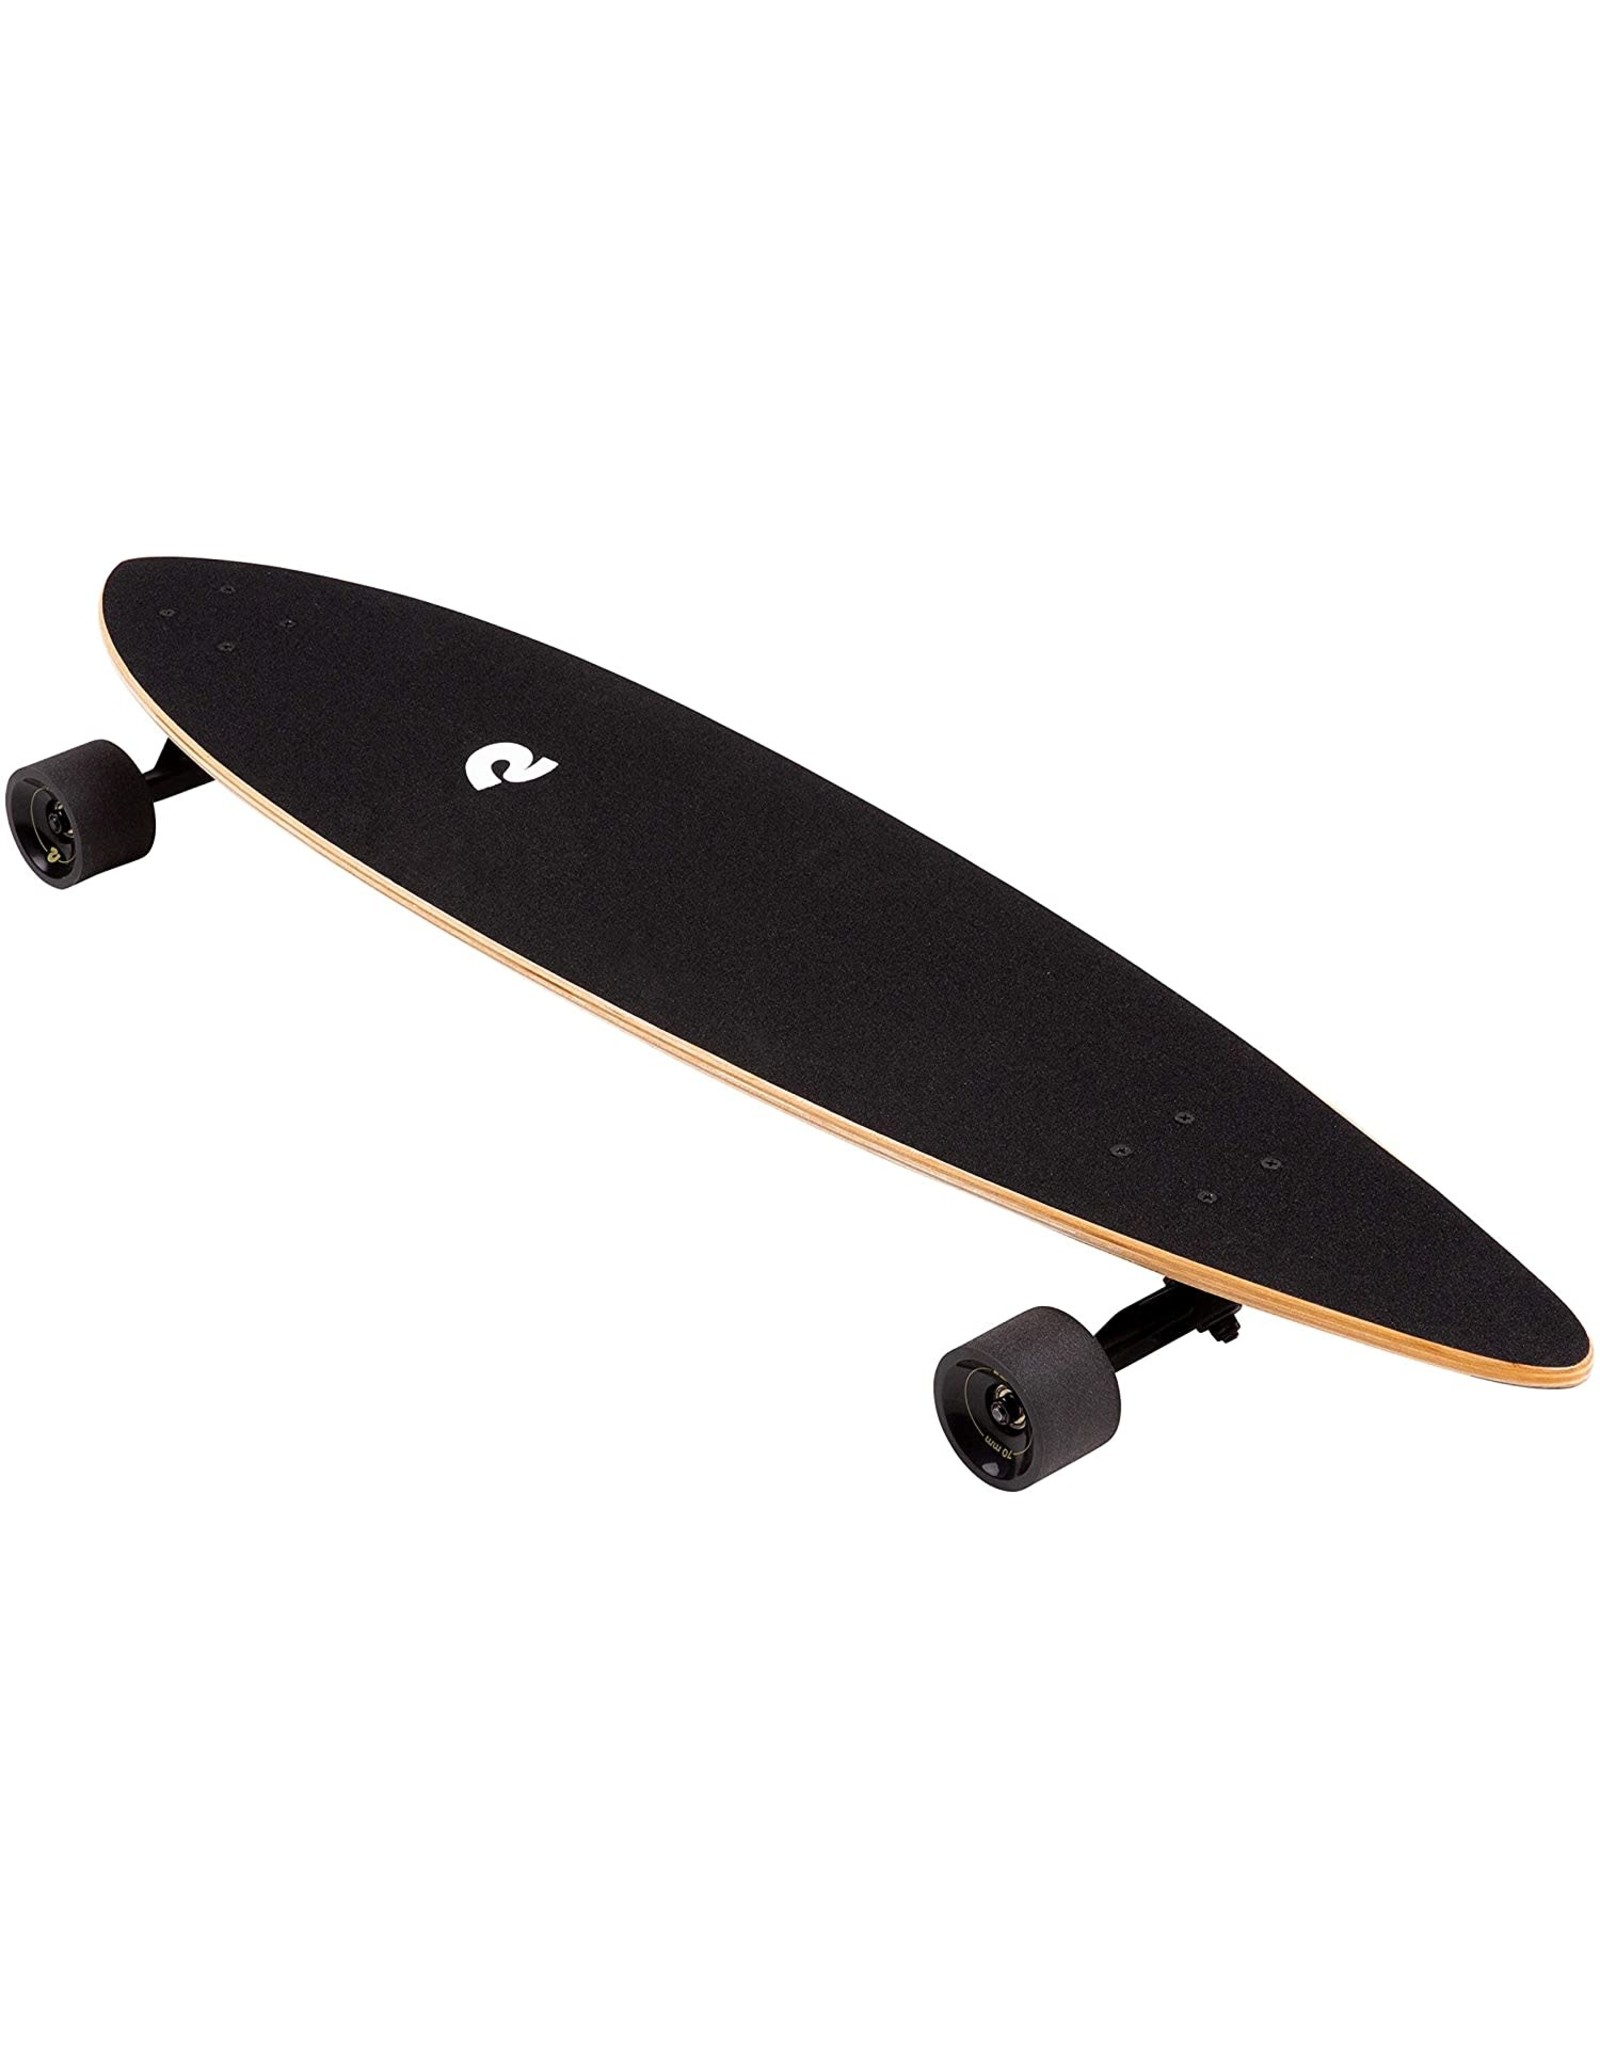 Simposio popurrí Continuar Retrospec Zed Pintail Longboard Skateboard Complete Cruiser Bamboo &  Canadian Maple Wood Cruiser w/Reverse Kingpin Trucks for Commuting, Cruising,  Carving & Downhill Riding - Amazing Bargains USA - Buffalo, NY